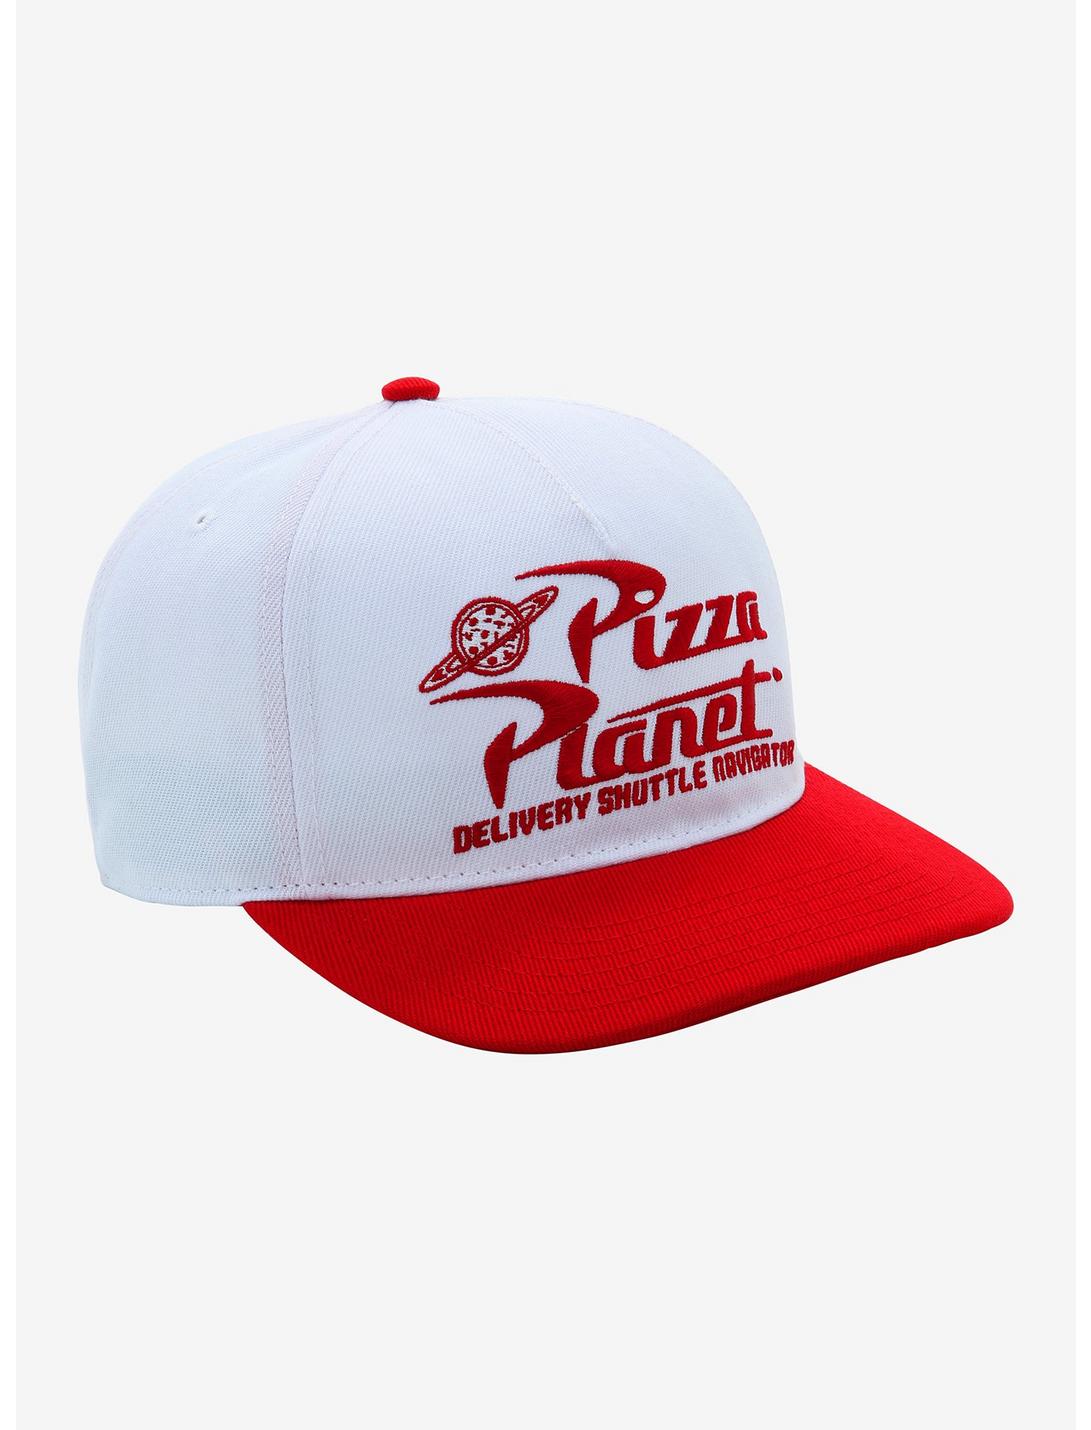 Concept One Accessories Toy Story Pizza Planet Snapback Adult Hat Red 